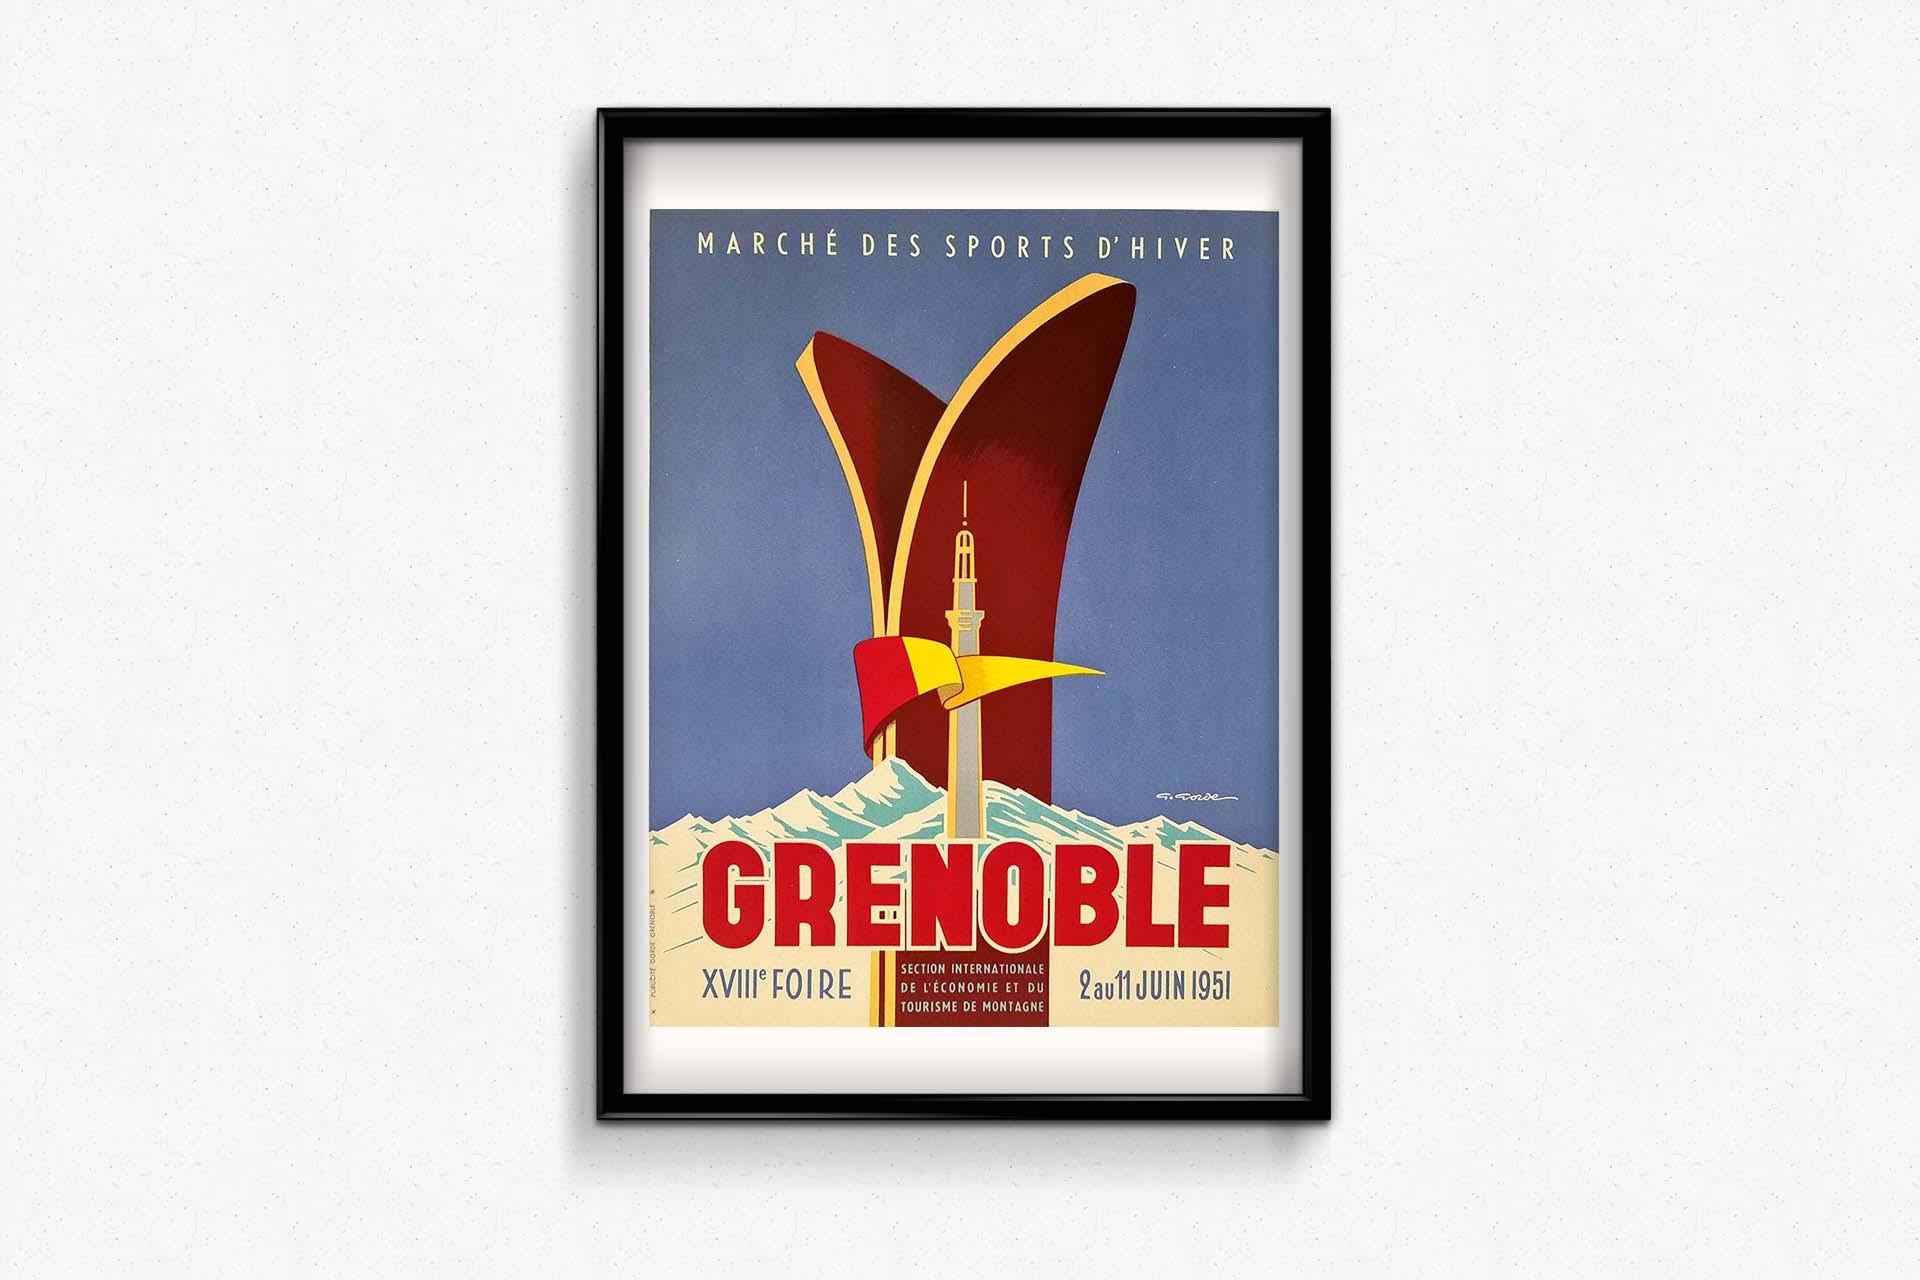 This original poster features various symbols associated with the Grenoble region. One can recognize the Perret Tower, the first reinforced concrete tower built in 1925 for the International Exhibition of White Coal and Tourism, Praise for